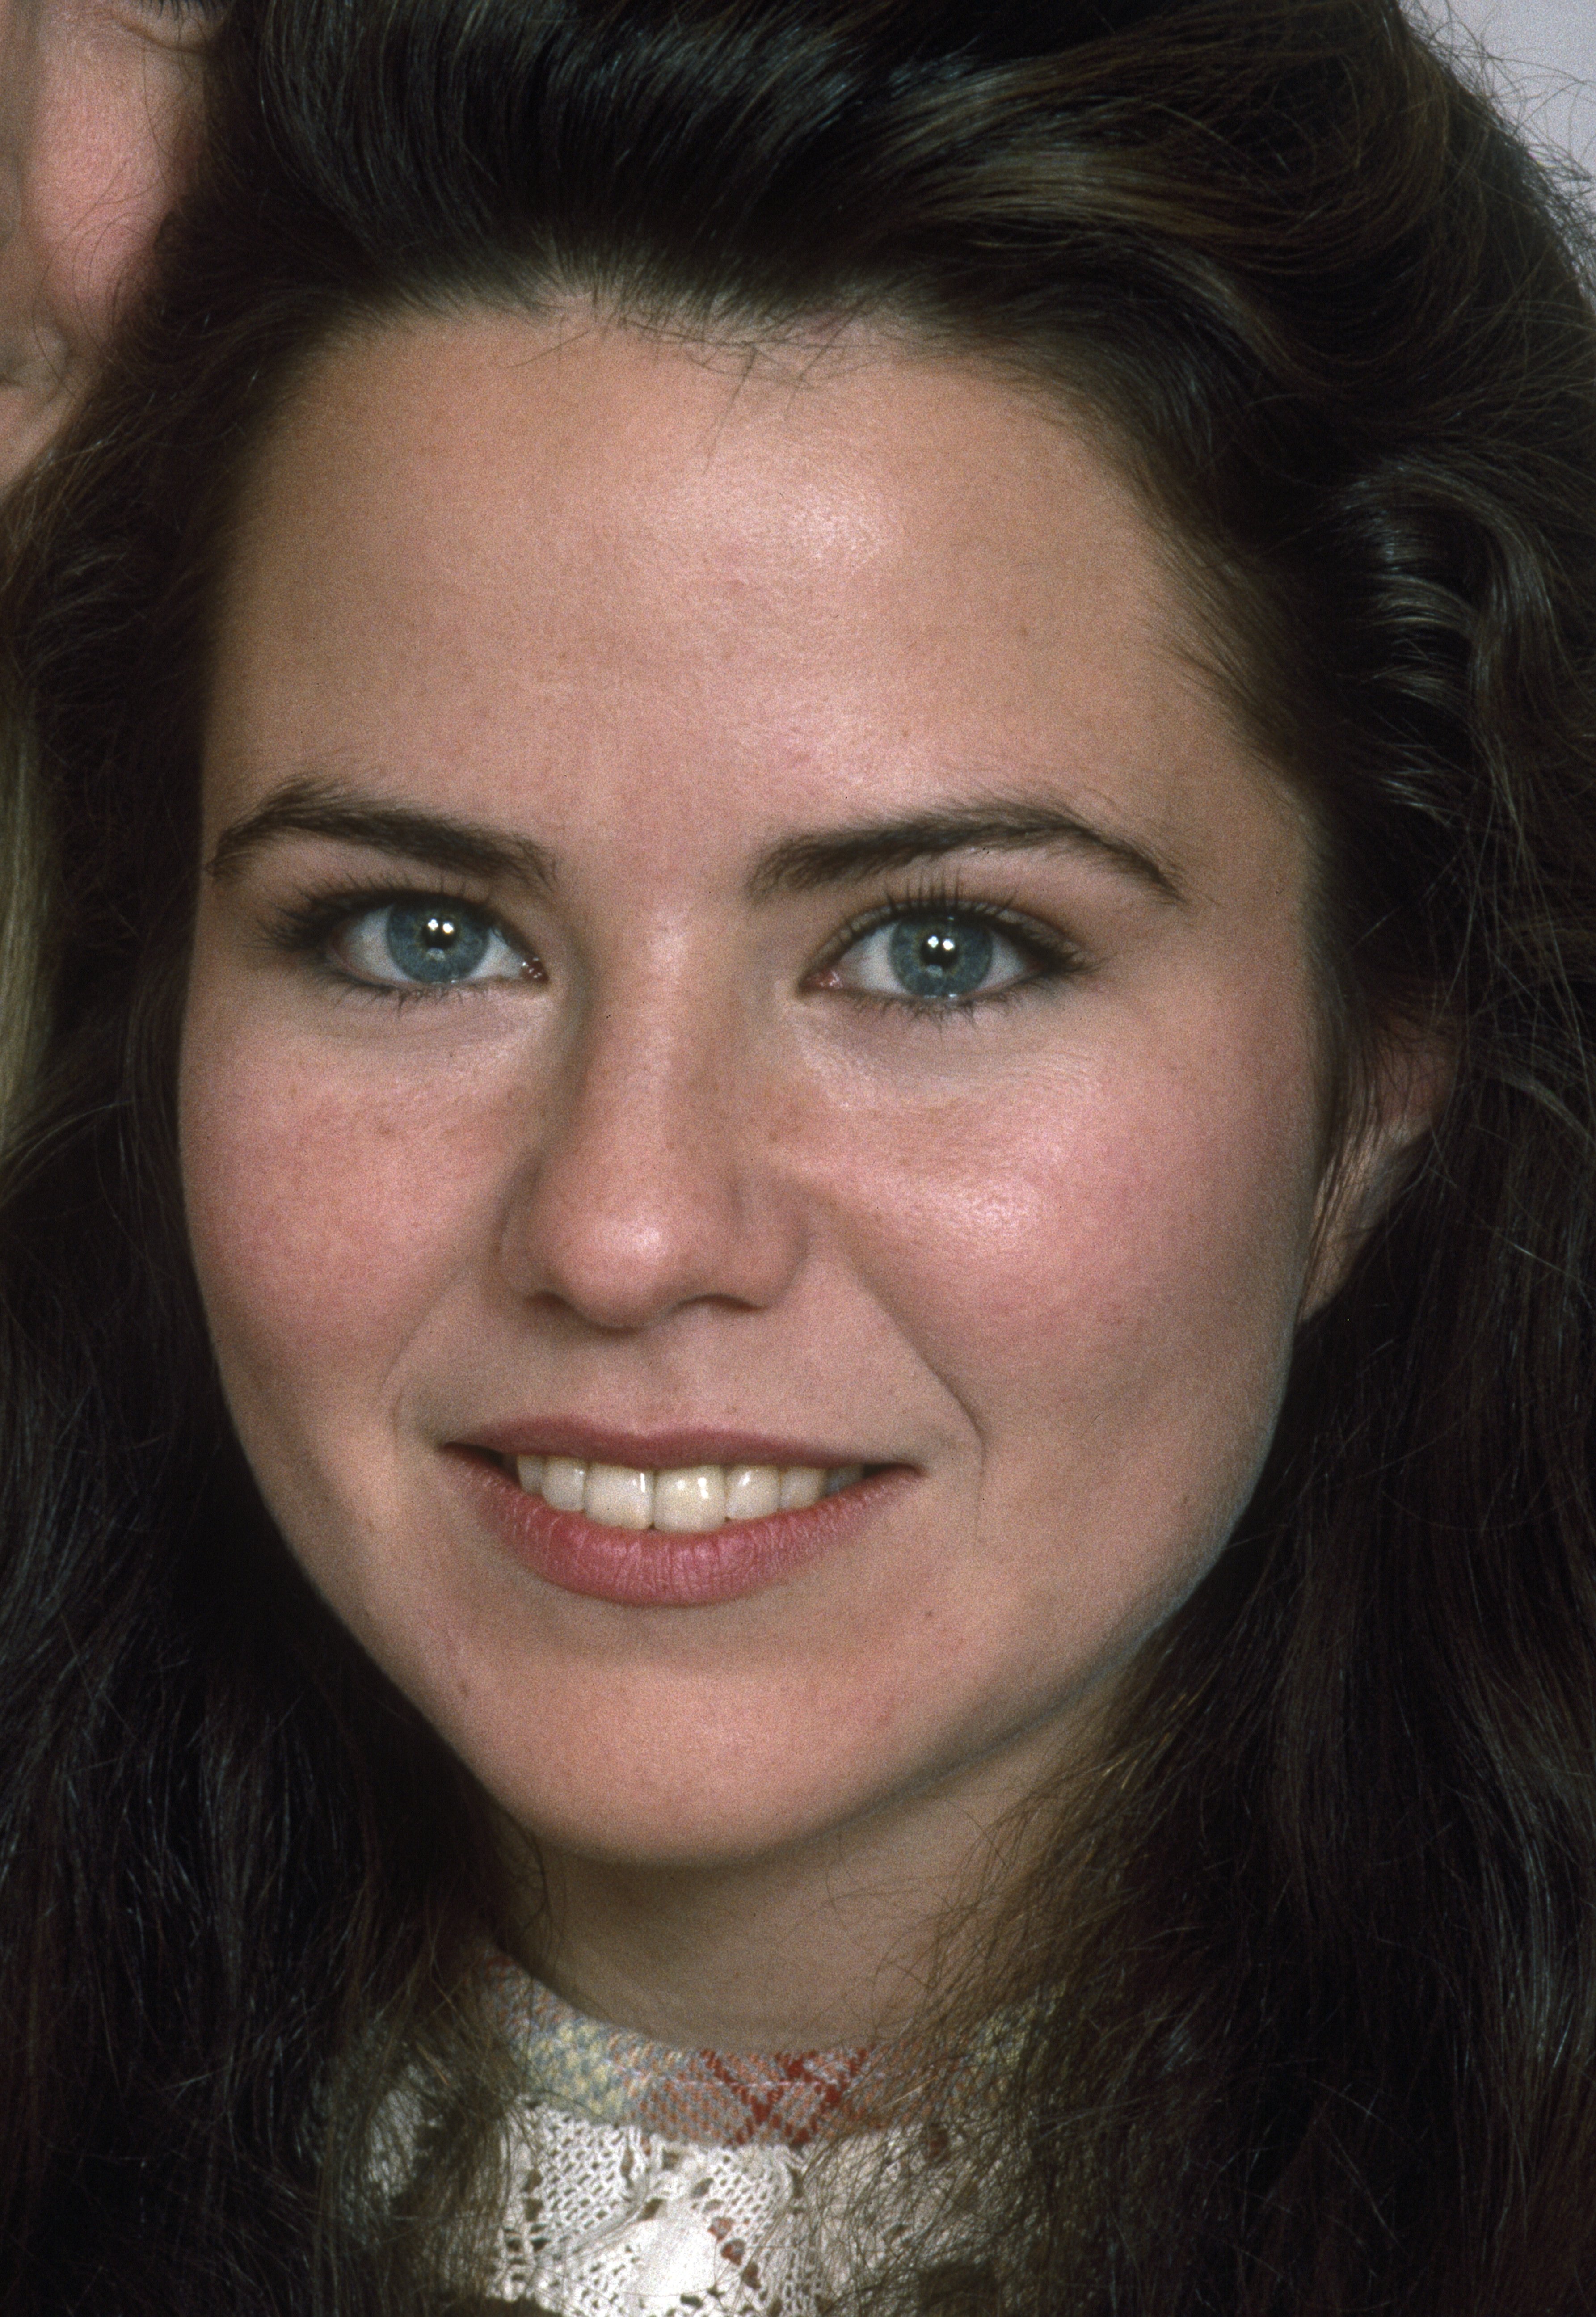 Koo Stark in London, in February 1984 | Source: Getty Images